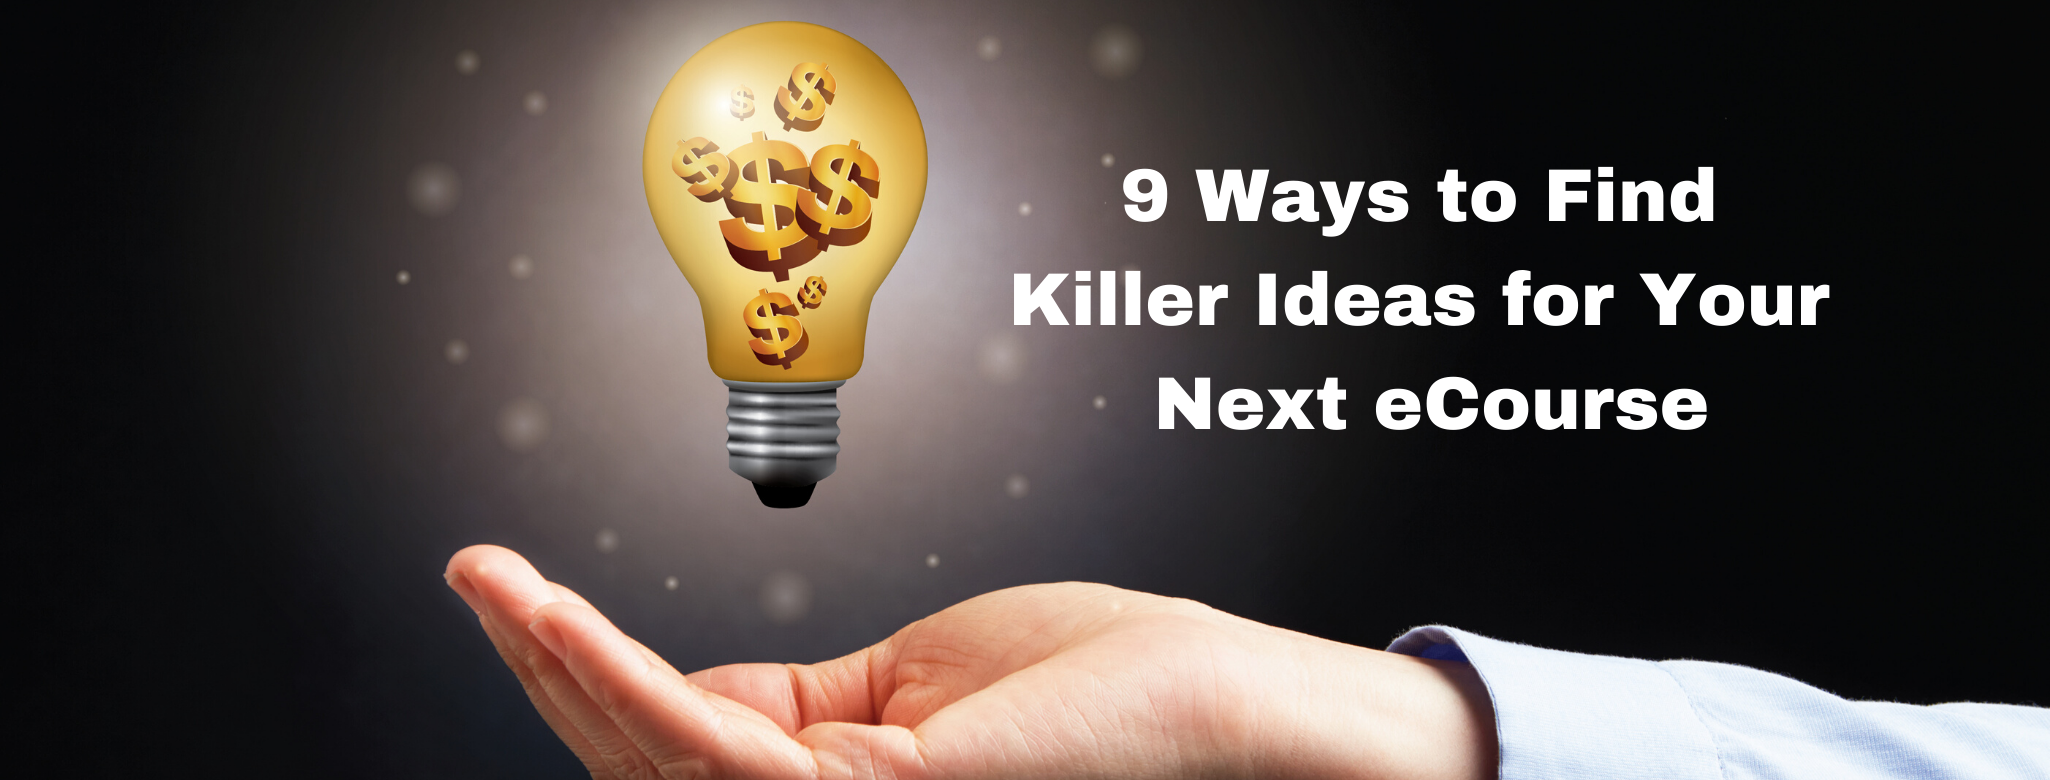 9 Ways to Find Killer Ideas for Your Next eCourse